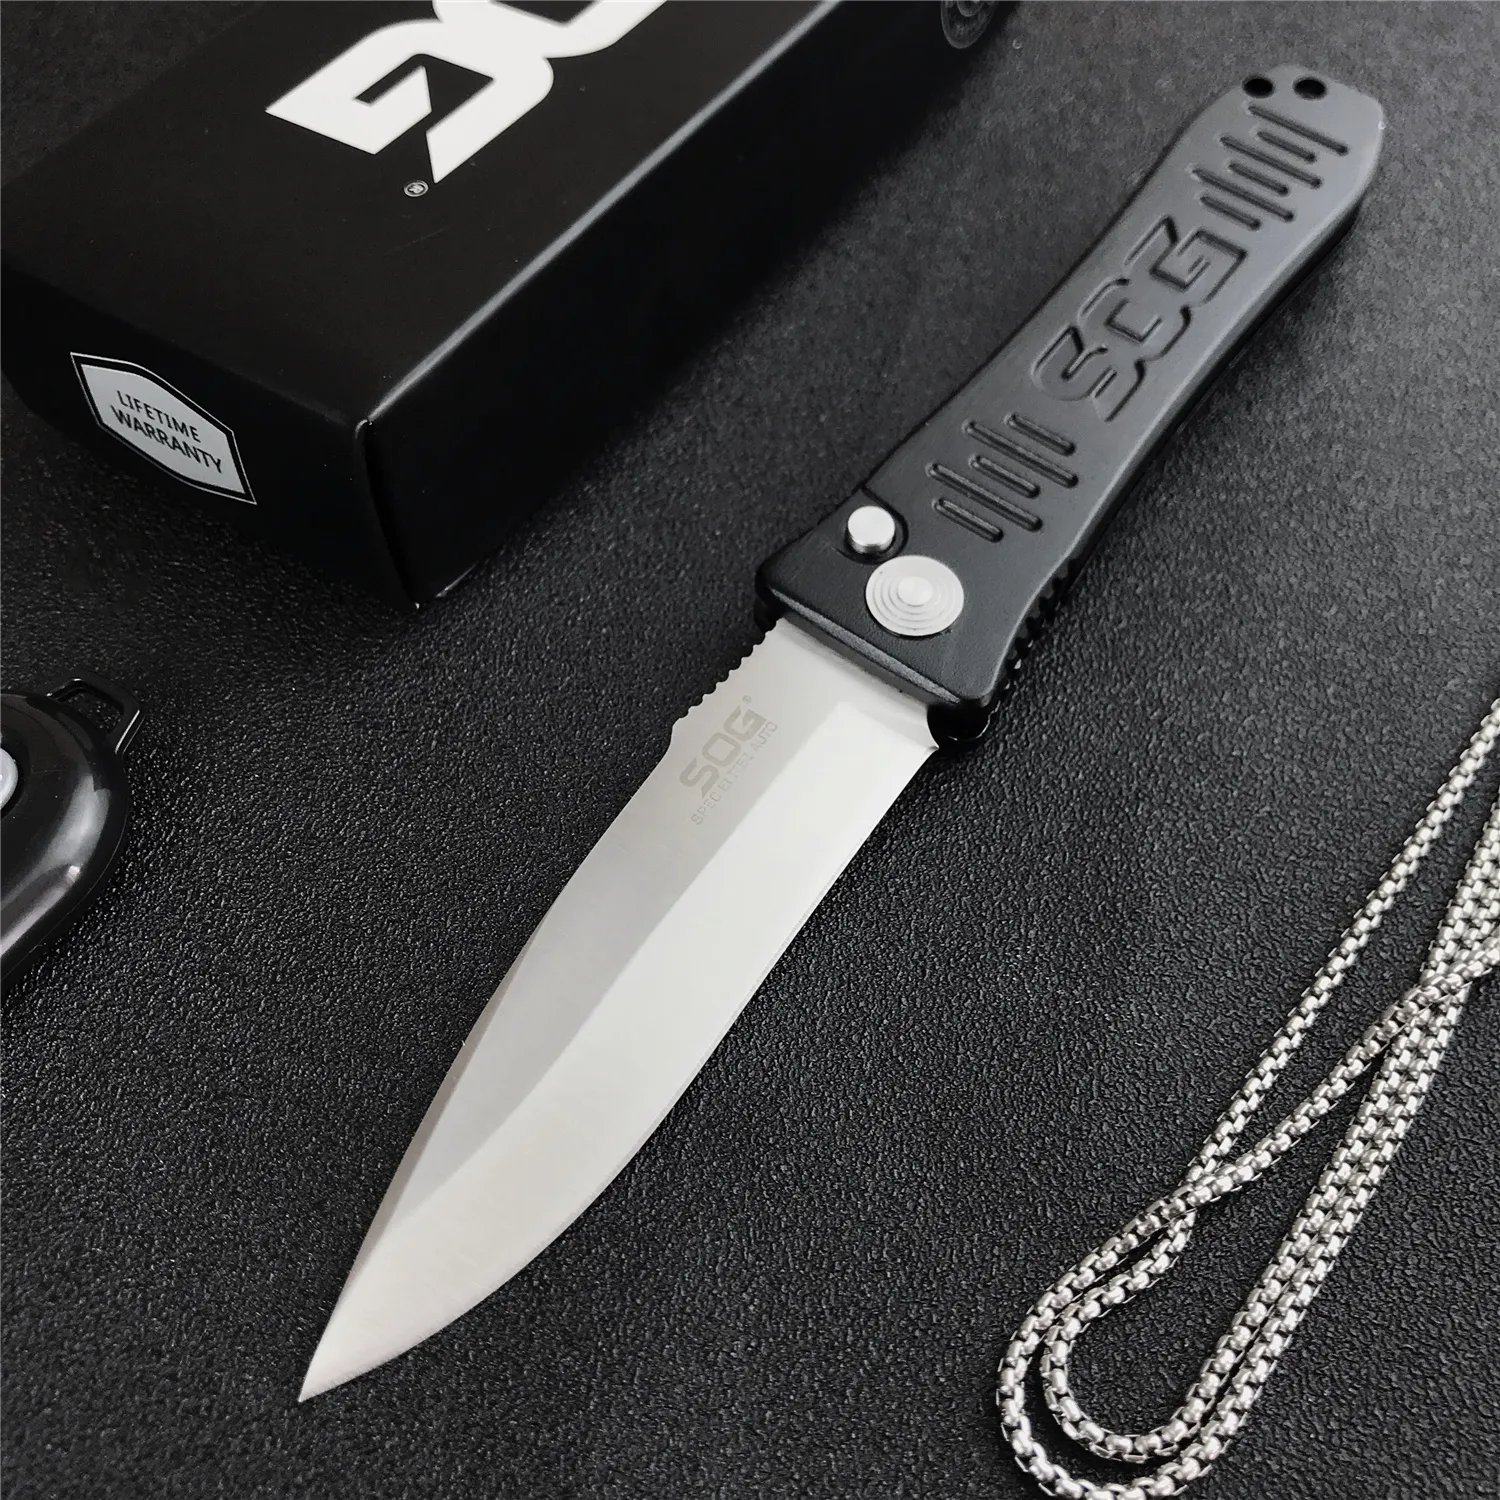 Tactical SOG Spec Elite Automatic Folding Knife 4" D2 Blade Black Aluminum Handle Outdoor Hunting Camping Survival Knives 535 9400 7800